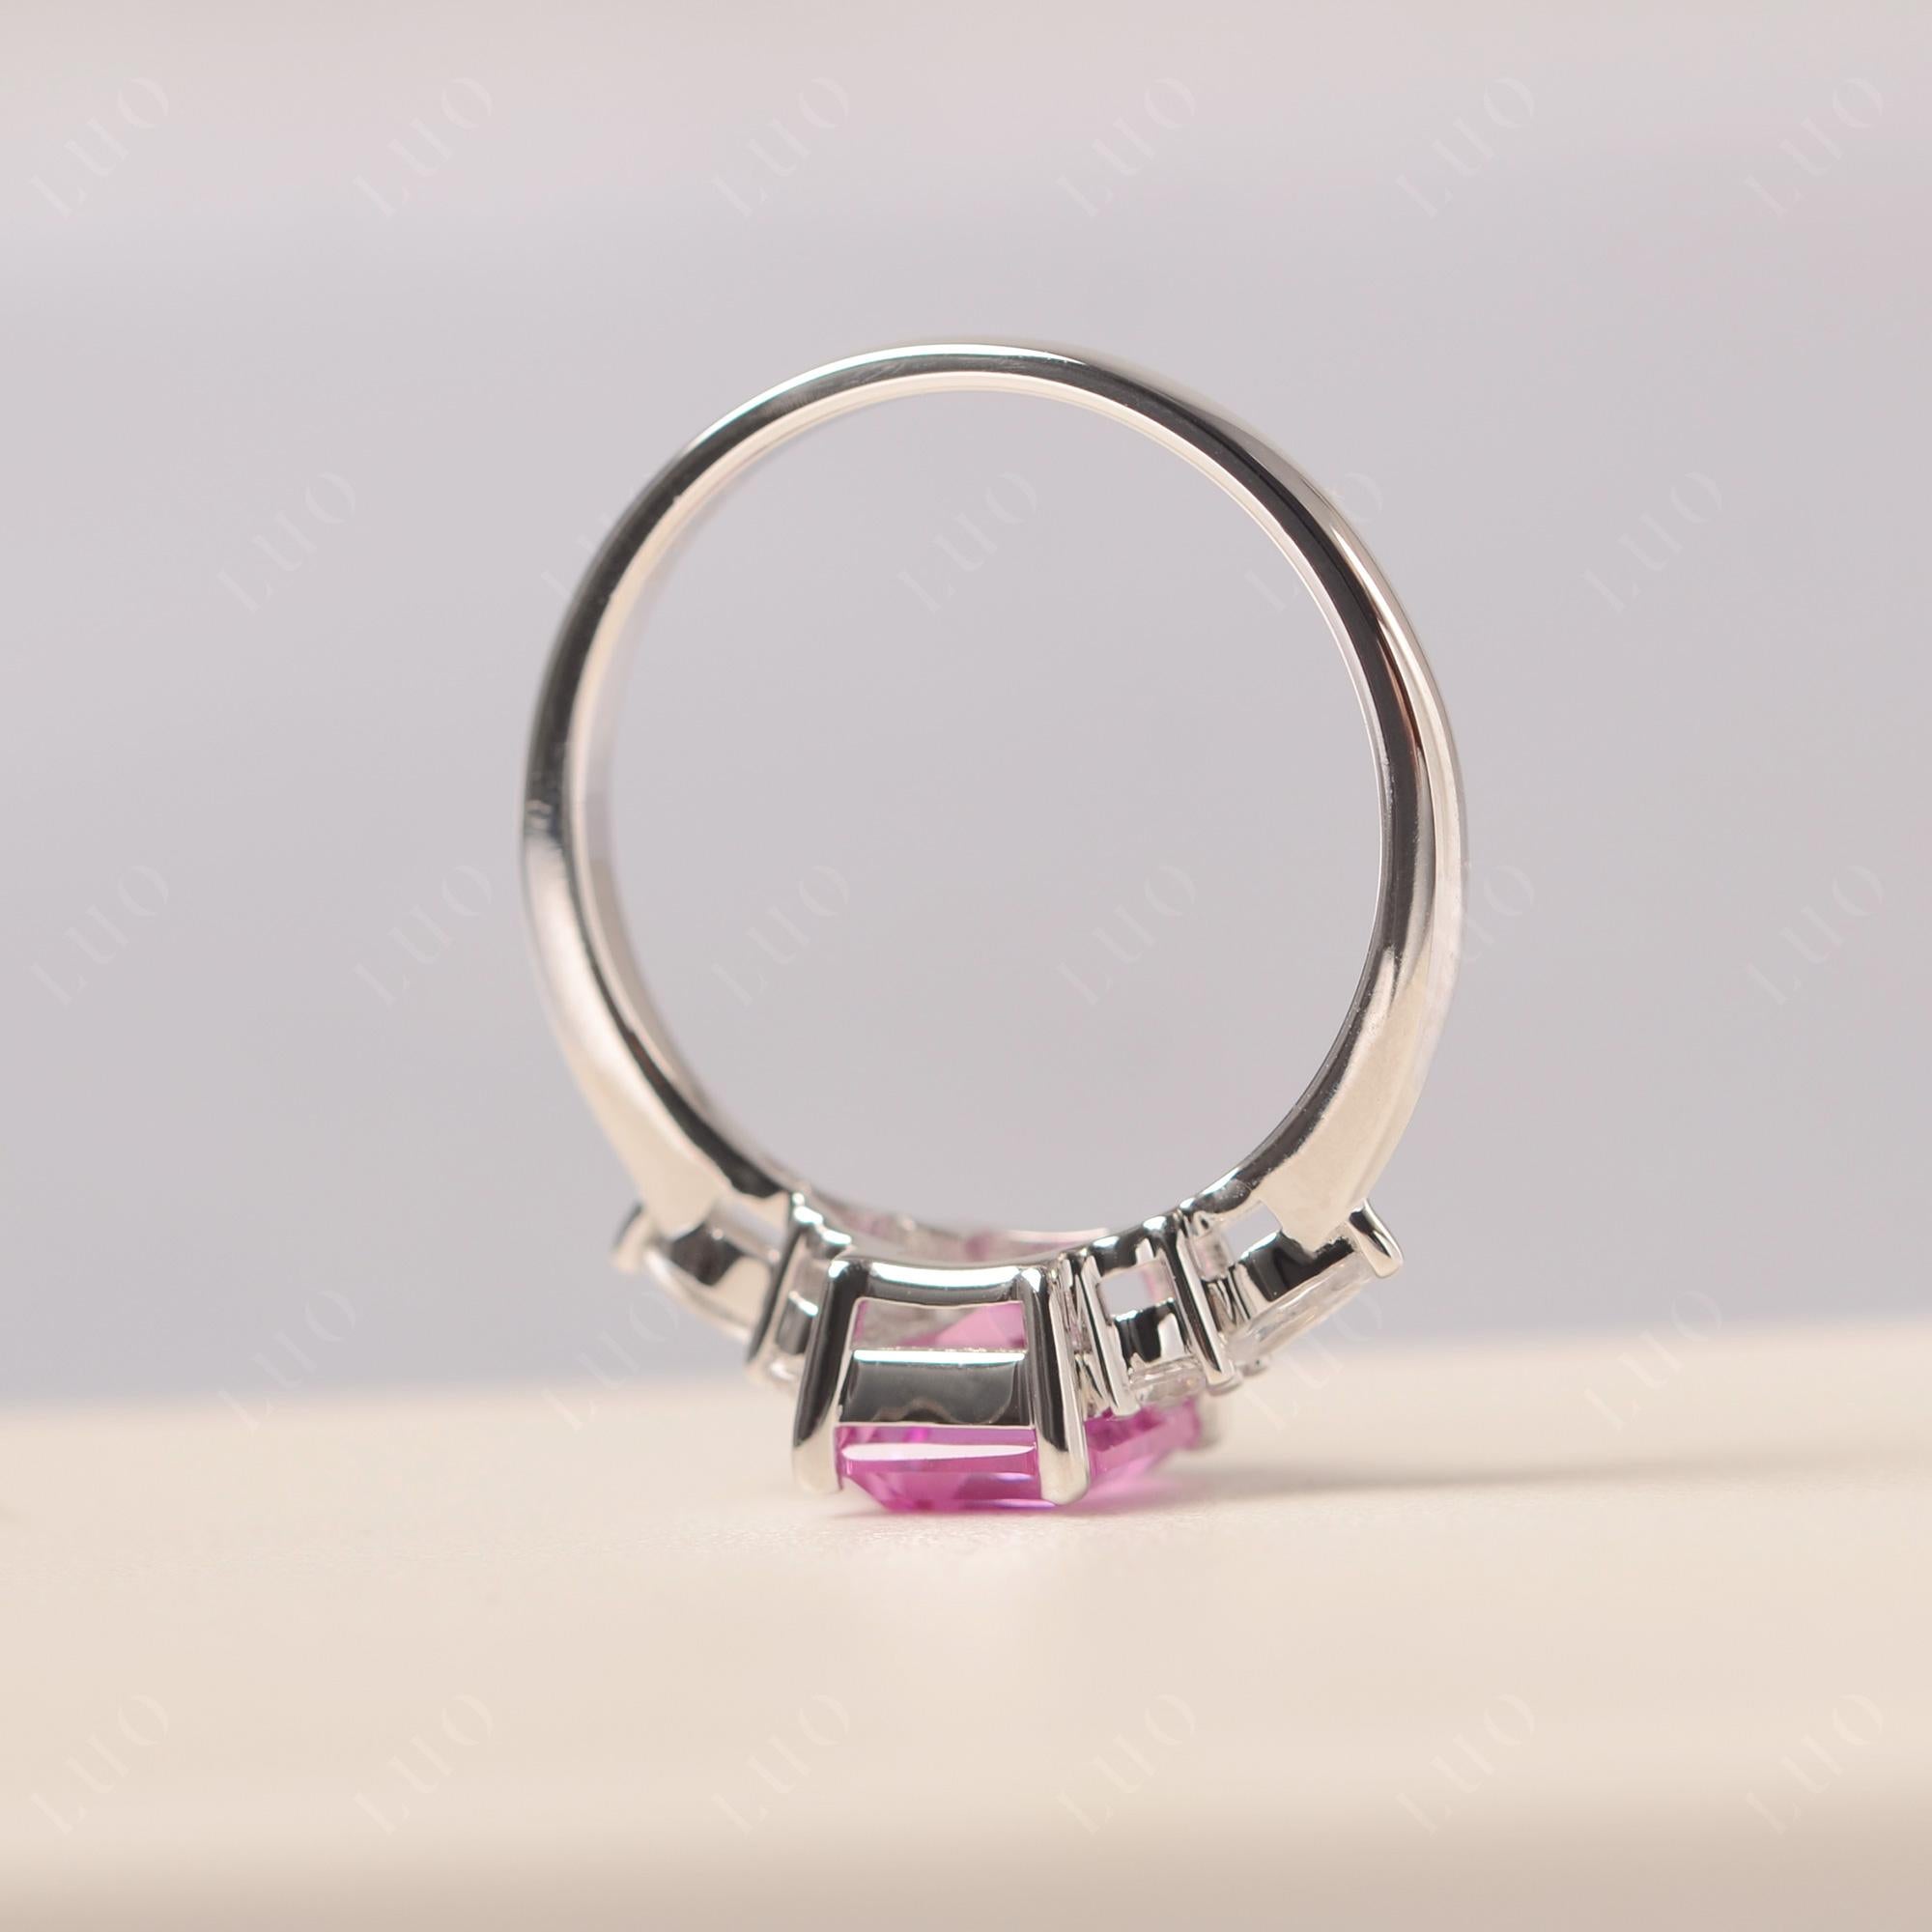 Simple Emerald Cut Pink Sapphire Ring - LUO Jewelry